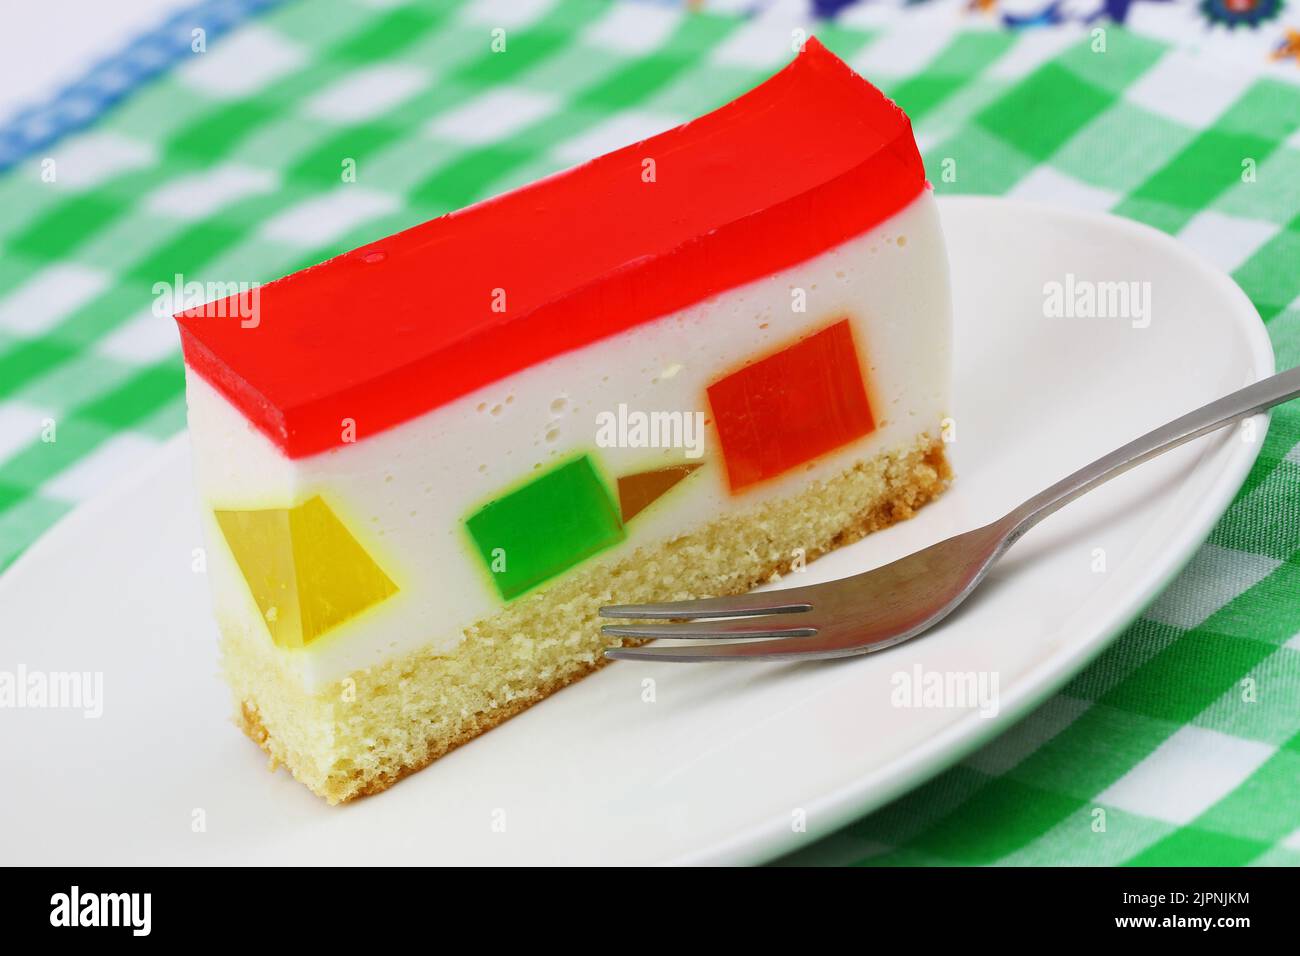 Cheesecake with colorful pieces of fruit jelly pieces, closeup Stock Photo